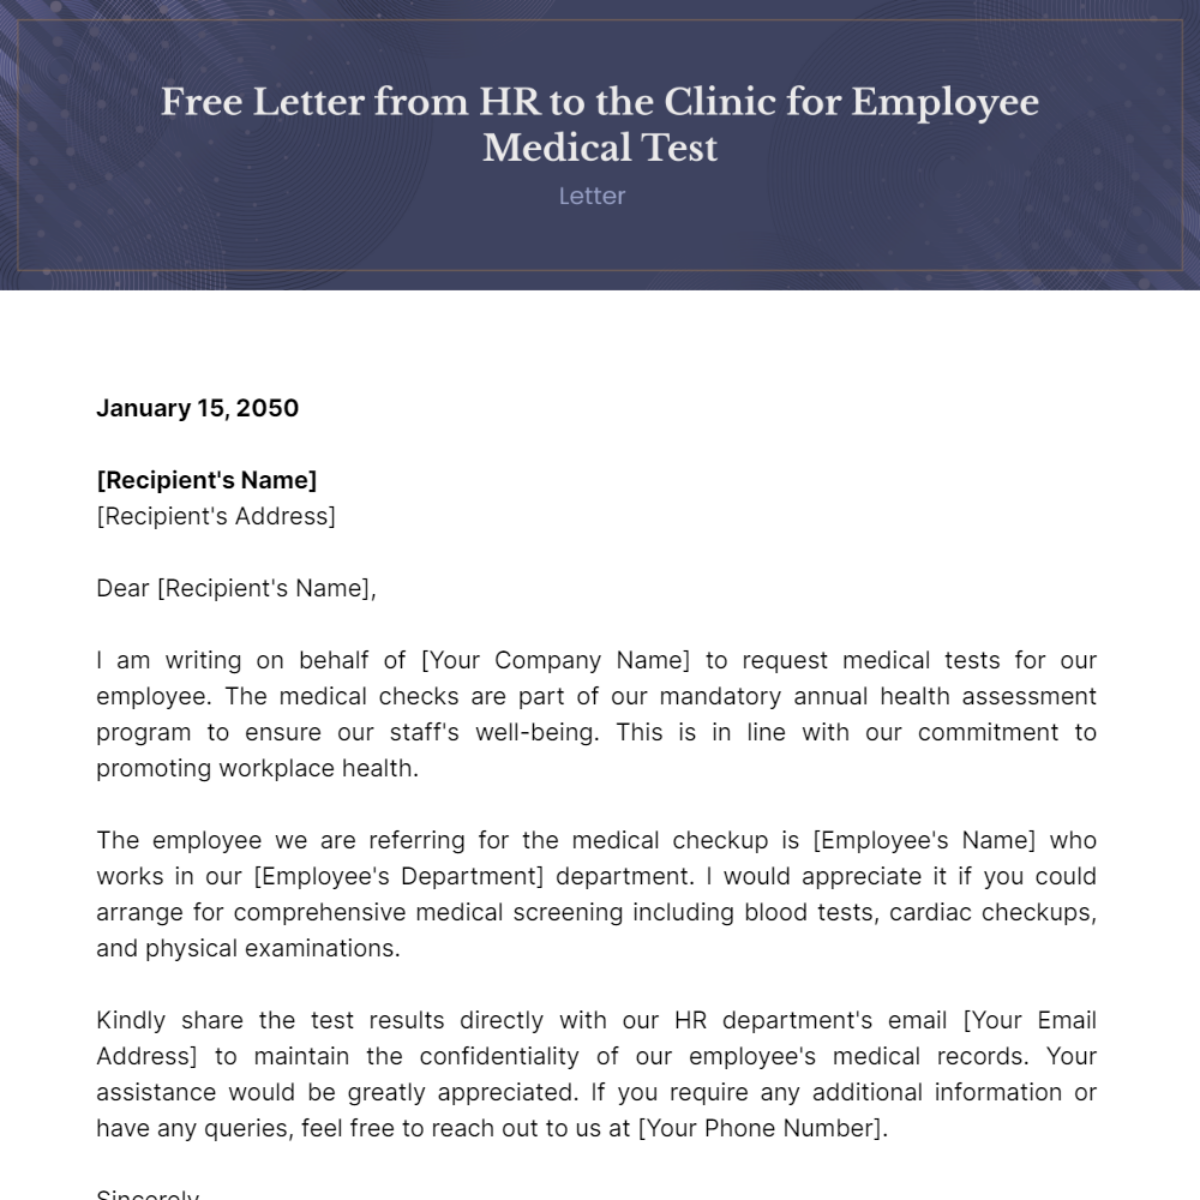 Letter from HR to the Clinic for Employee Medical Test Template